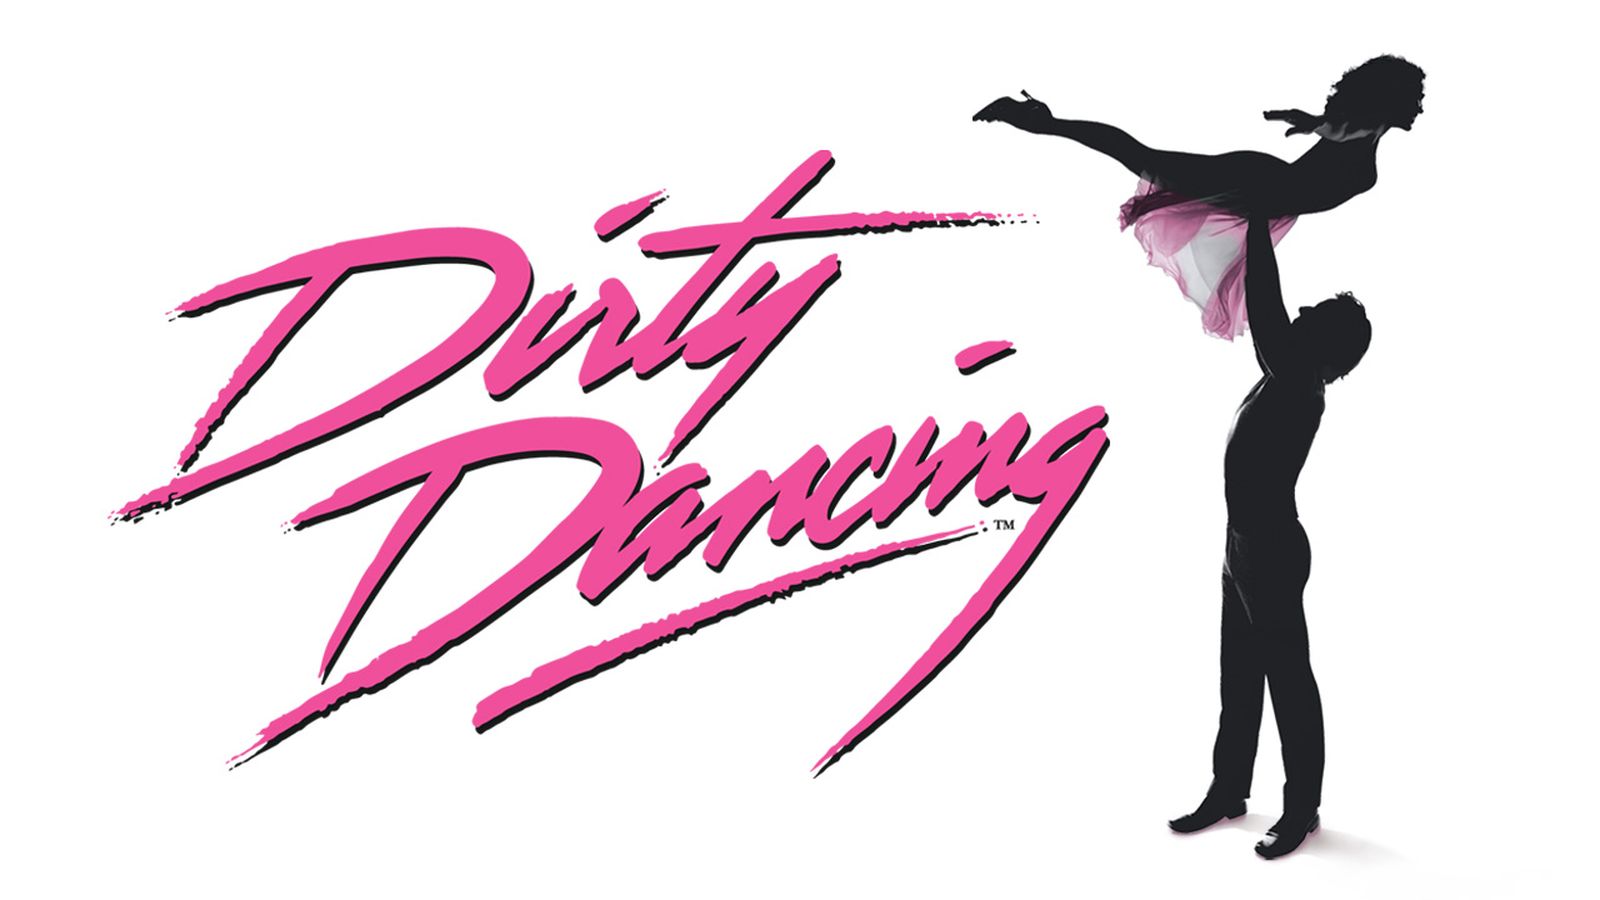 Dirty Dancing recipe roundup from ChefSarahElizabeth.com